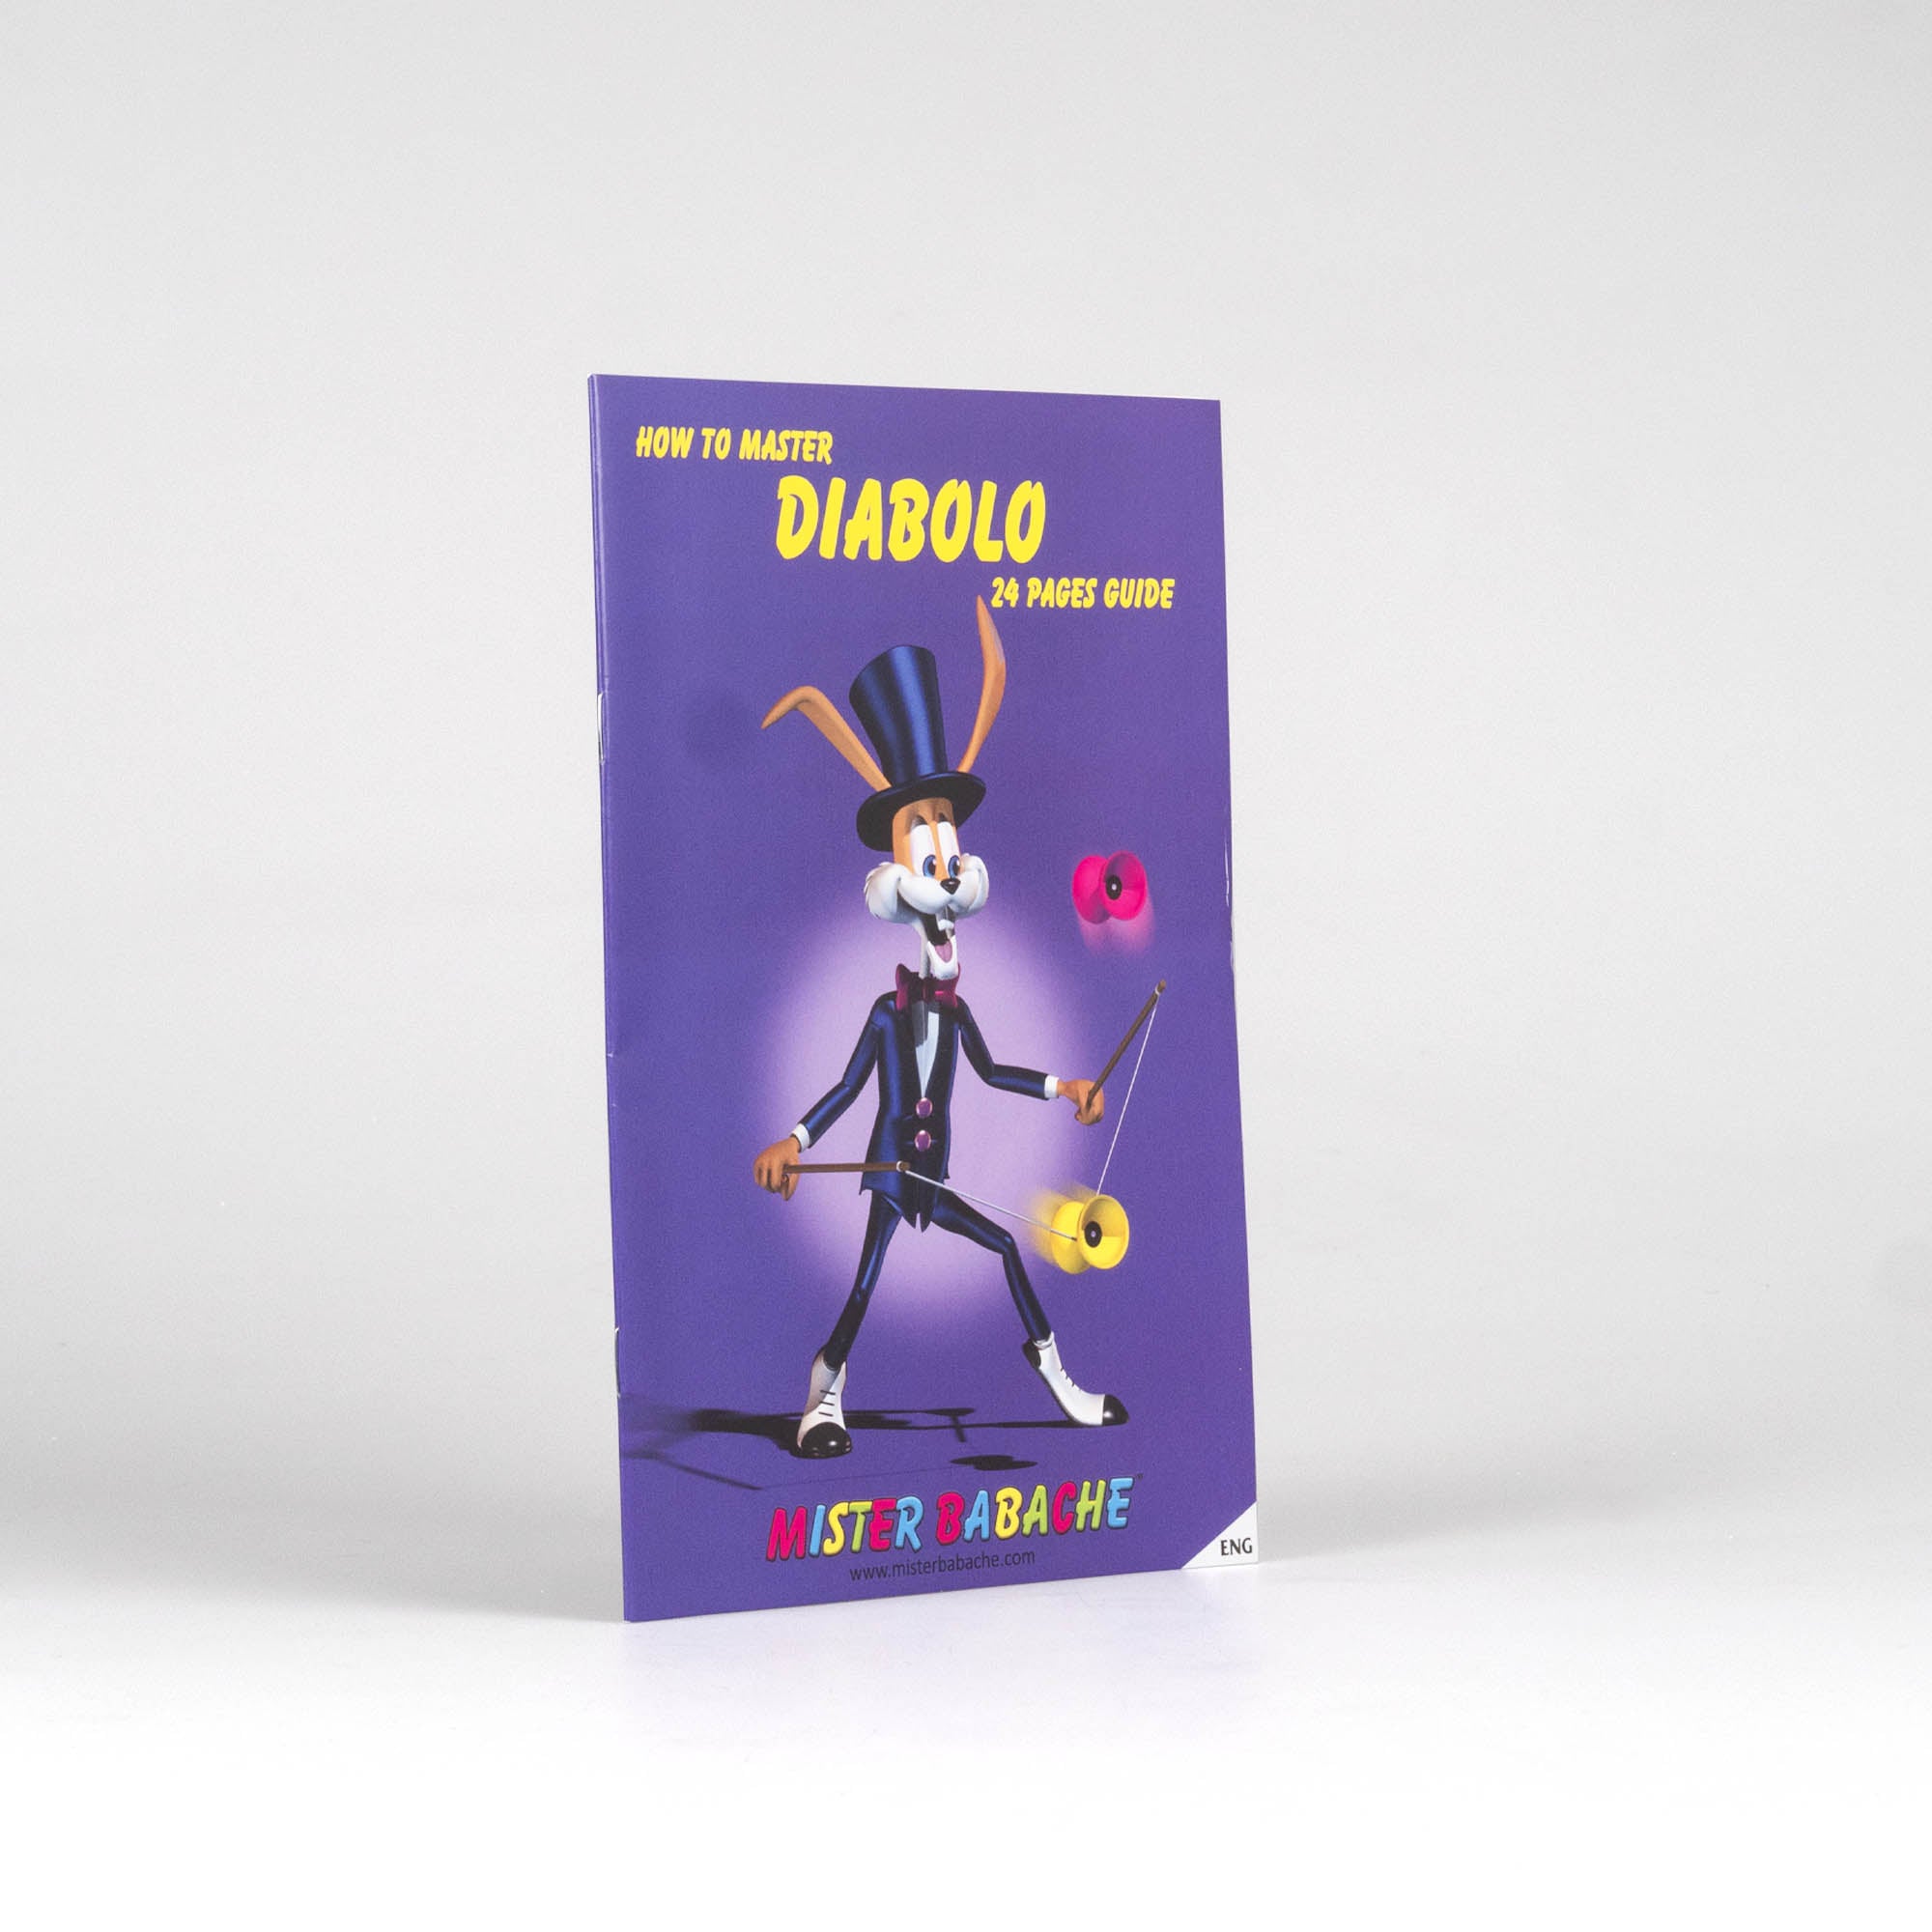 Diabolo booklet front cover and thin spine